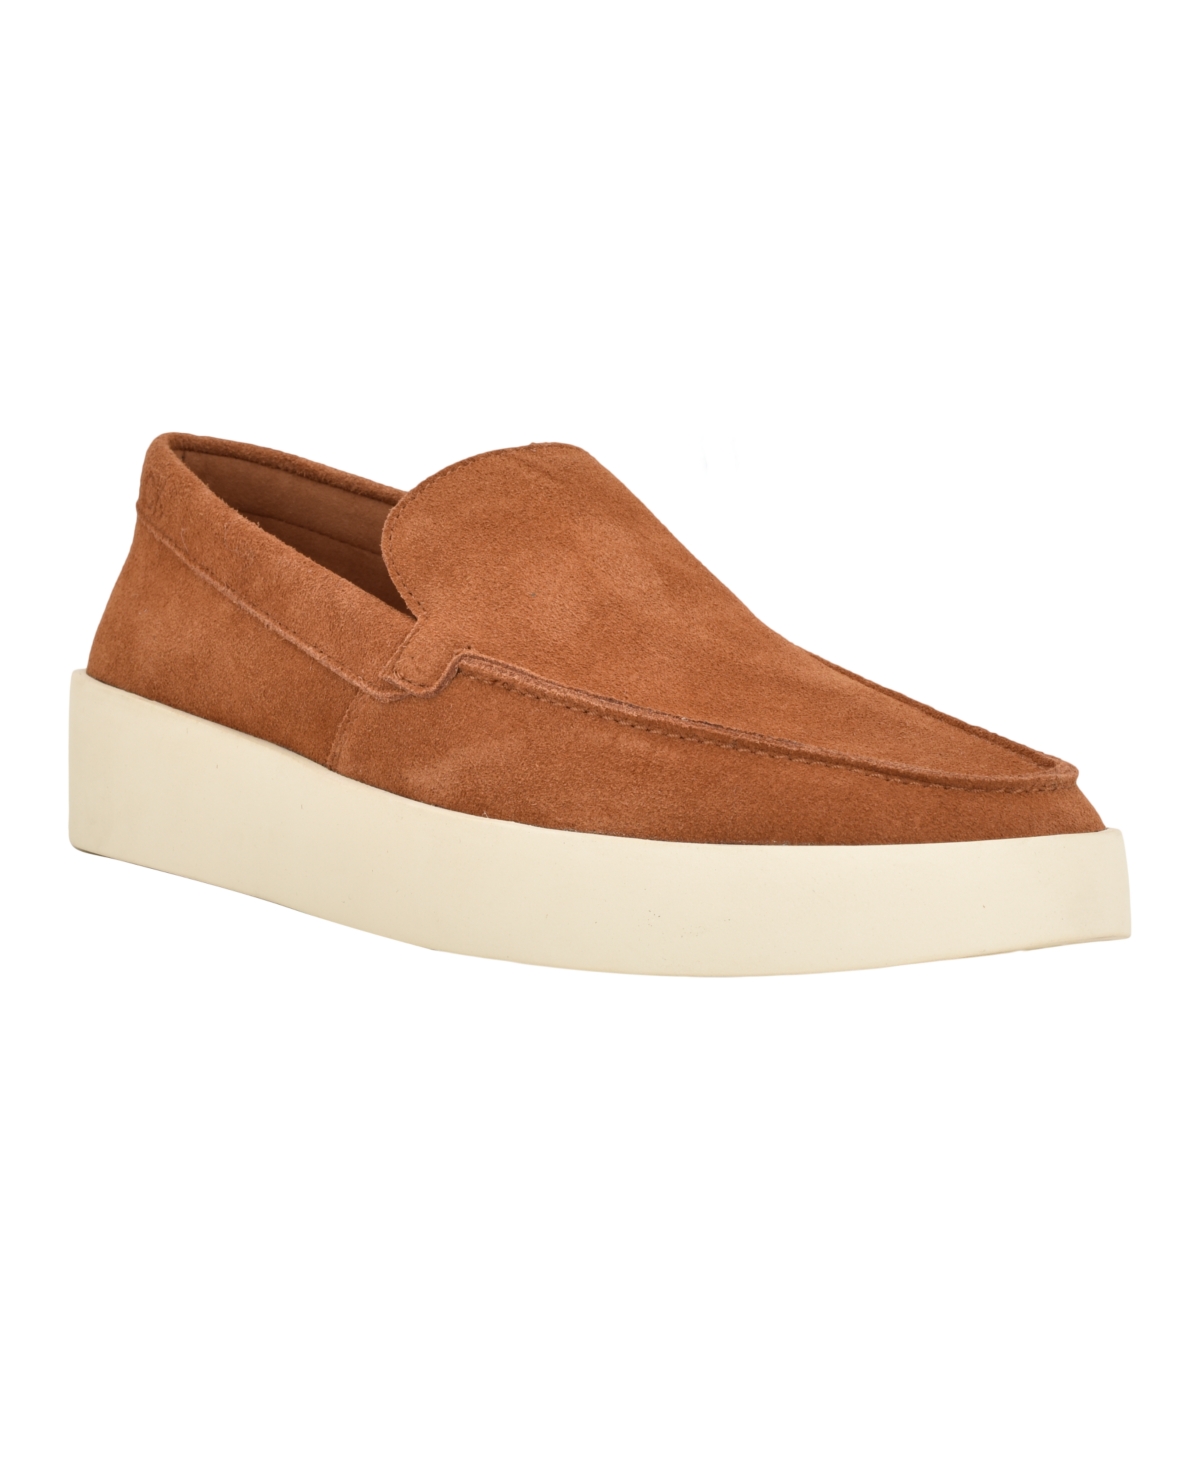 Calvin Klein Men's Carch Casual Slip-on Loafers Men's Shoes In Cognac